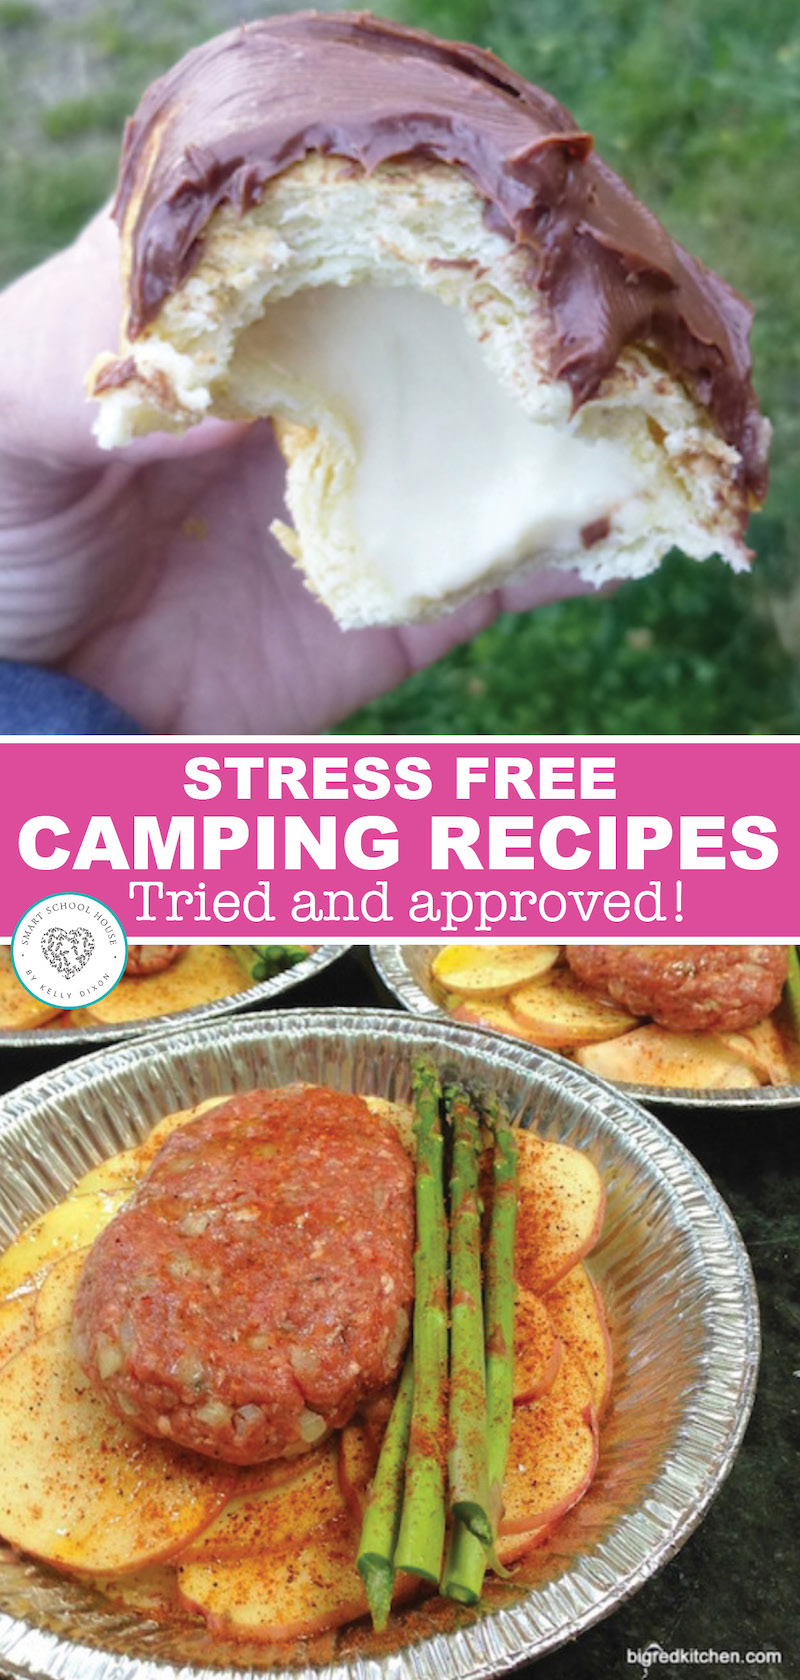 The beautiful weather is here and camping season is about to begin. Find wonderful, stress free recipes for camping food here. These recipes are tried, tested, and sure to give you delicious camping food. #camping #food #prep #campfood #dessert #recipes #smartschoolhouse